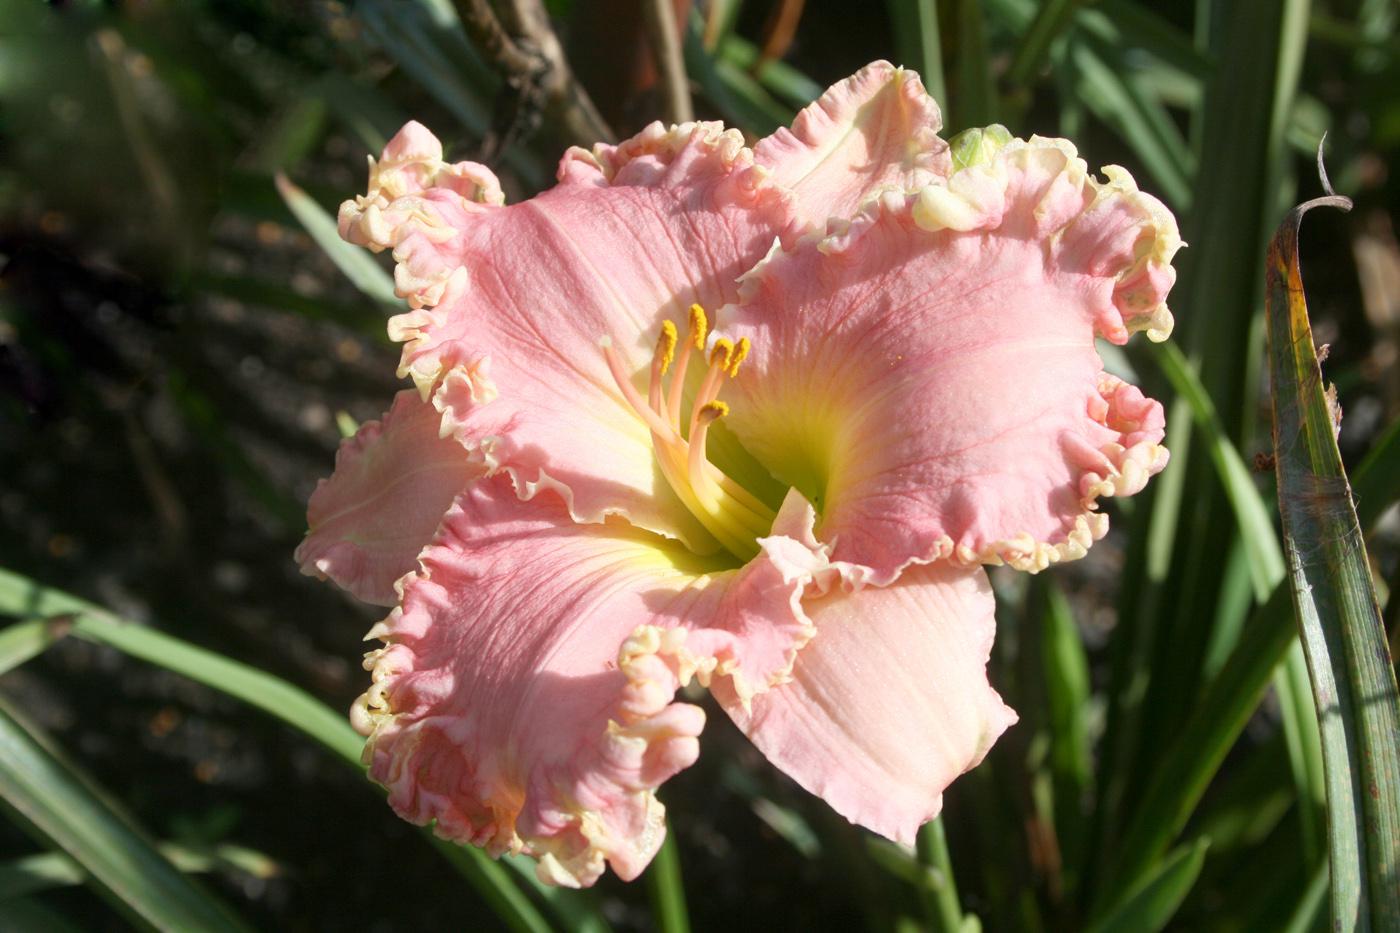 In addition to a wide range of colors, daylilies can have unique physical features, such as Pink Lemonade Party's ruffled golden edges on light pink petals. (Photo by MSU Extension Service/Gary Bachman)